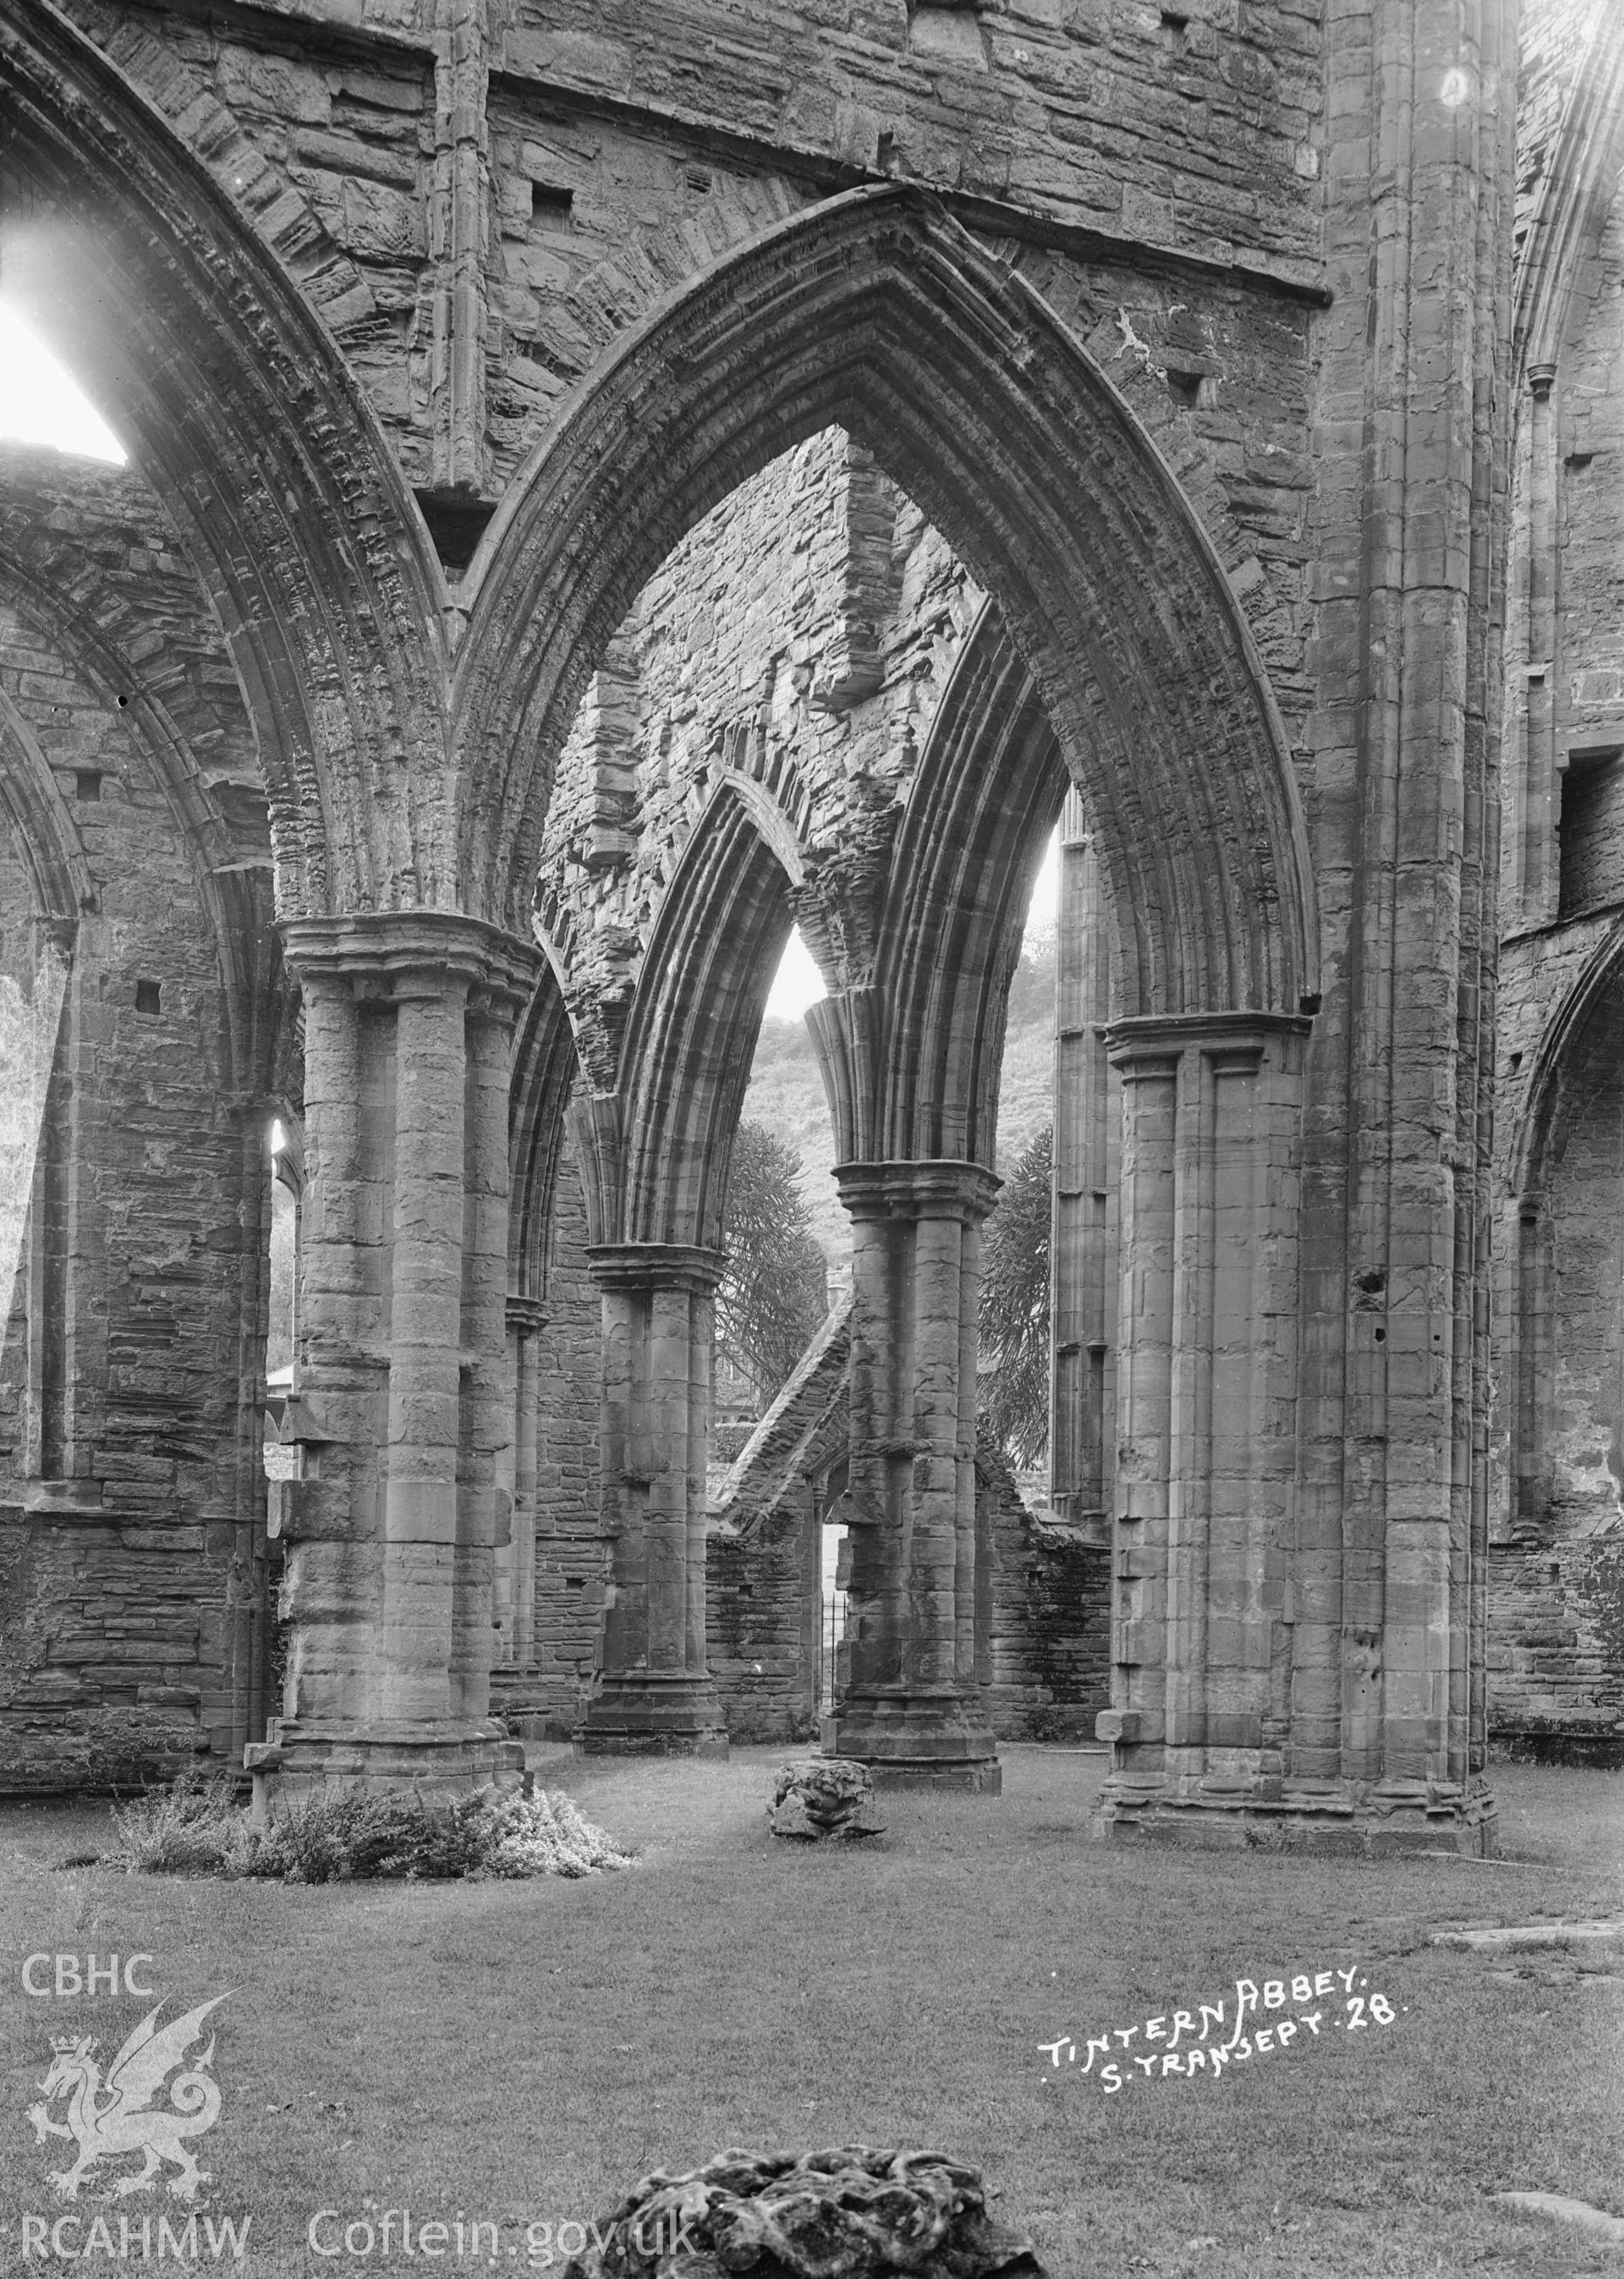 View of the south transcept of Tintern Abbey taken by  W A Call, c.1930.